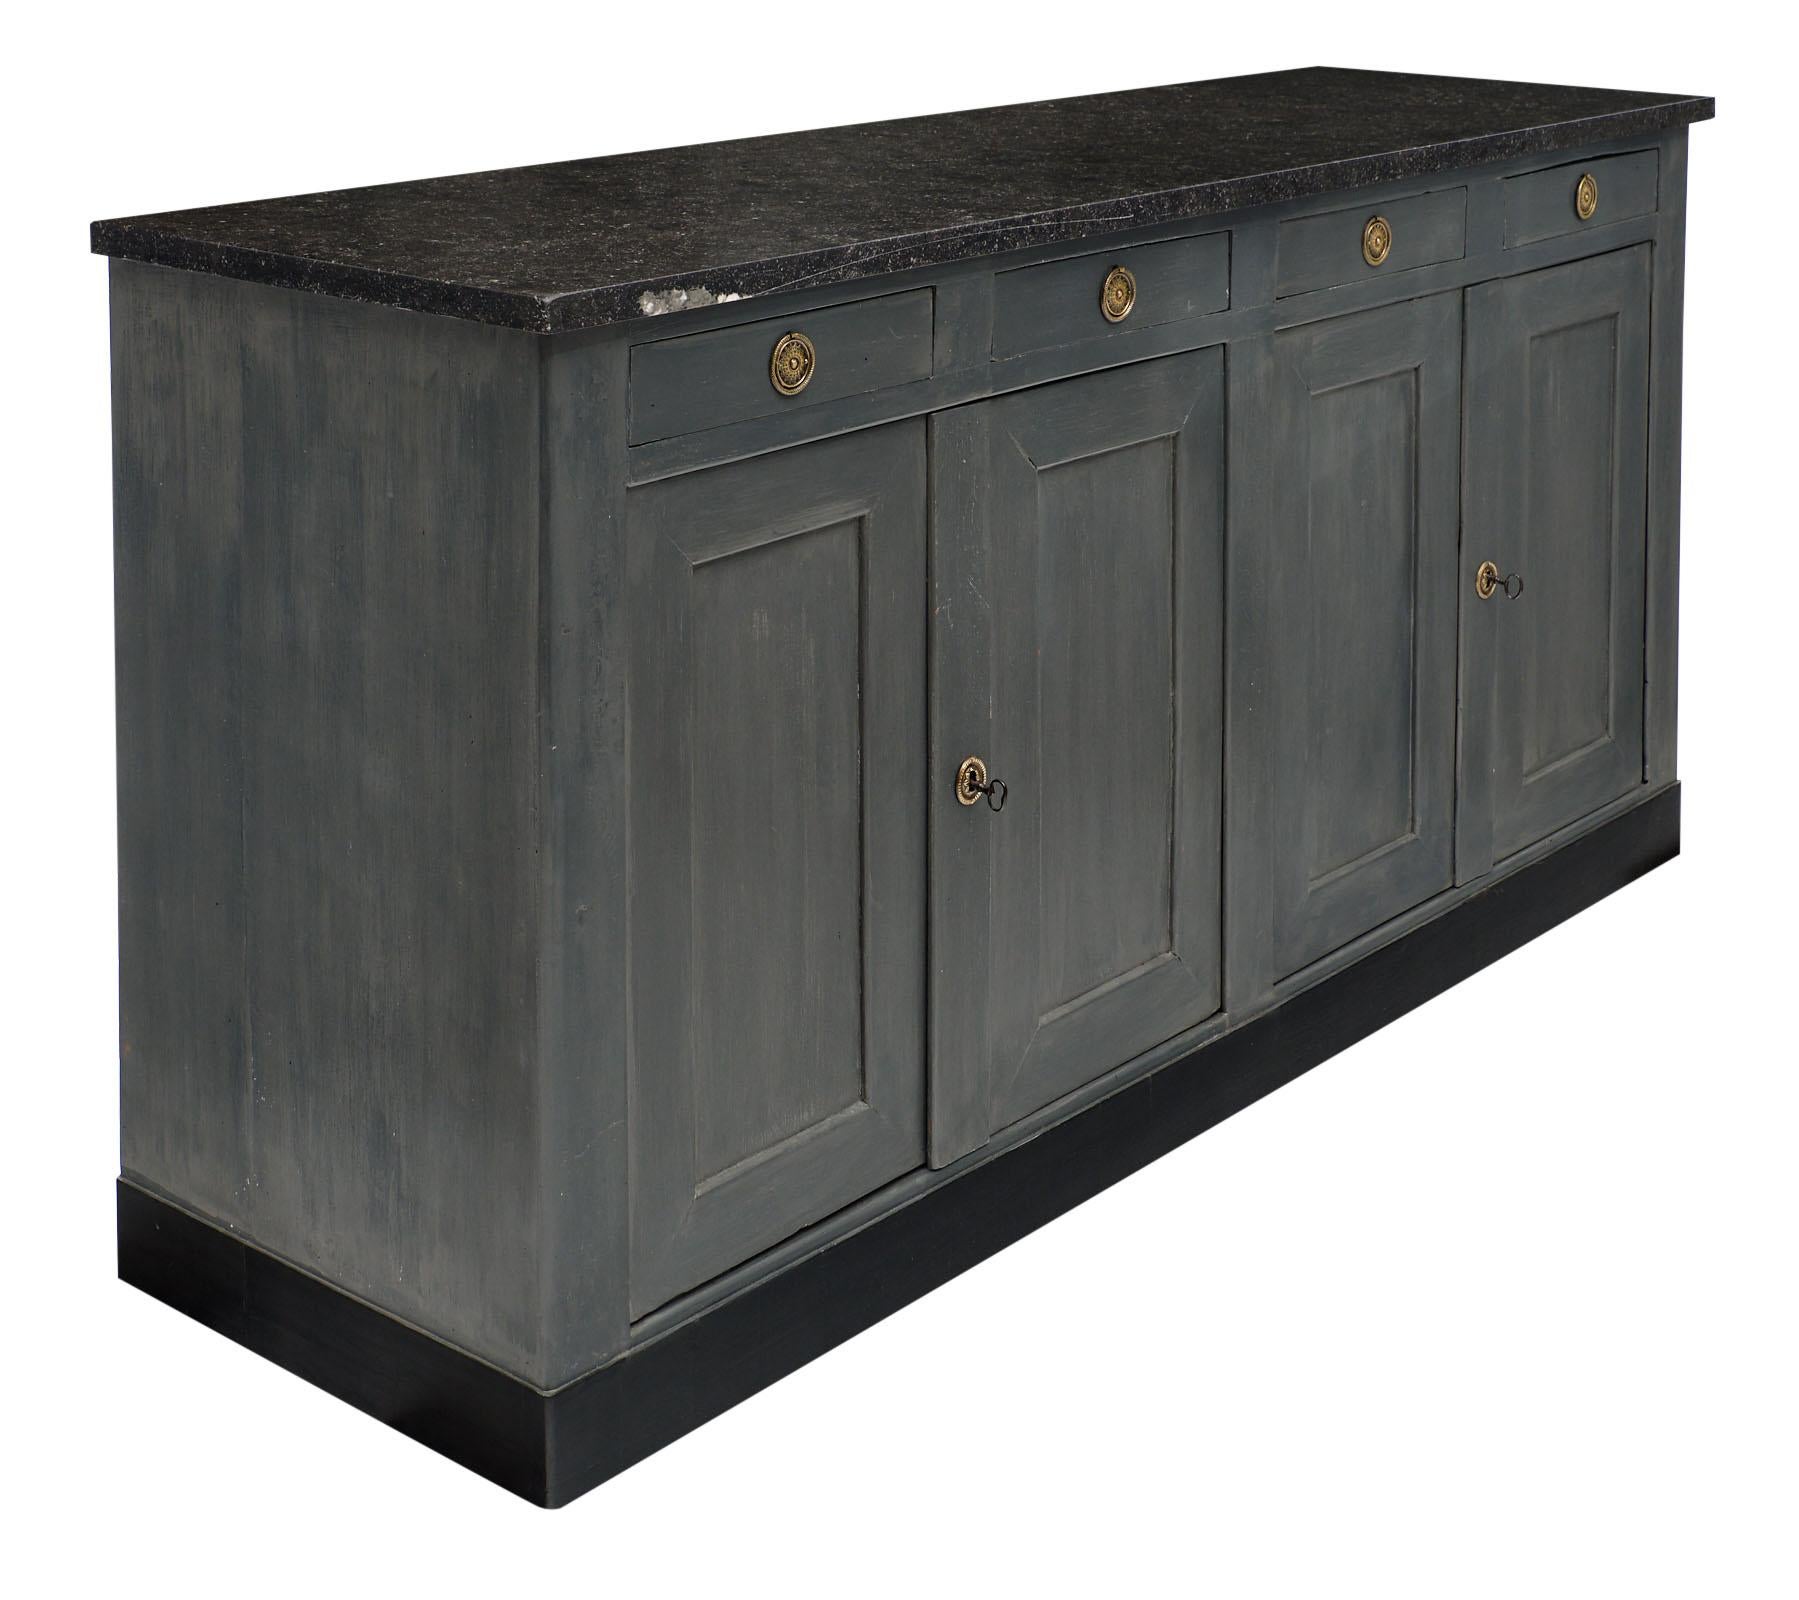 French provincial painted gray buffet made of solid fir and oak. We love the hand painted finish to this credenza with the deep gray color. It features a beautiful and original slab of gray marble as well. There are four dovetailed drawers above